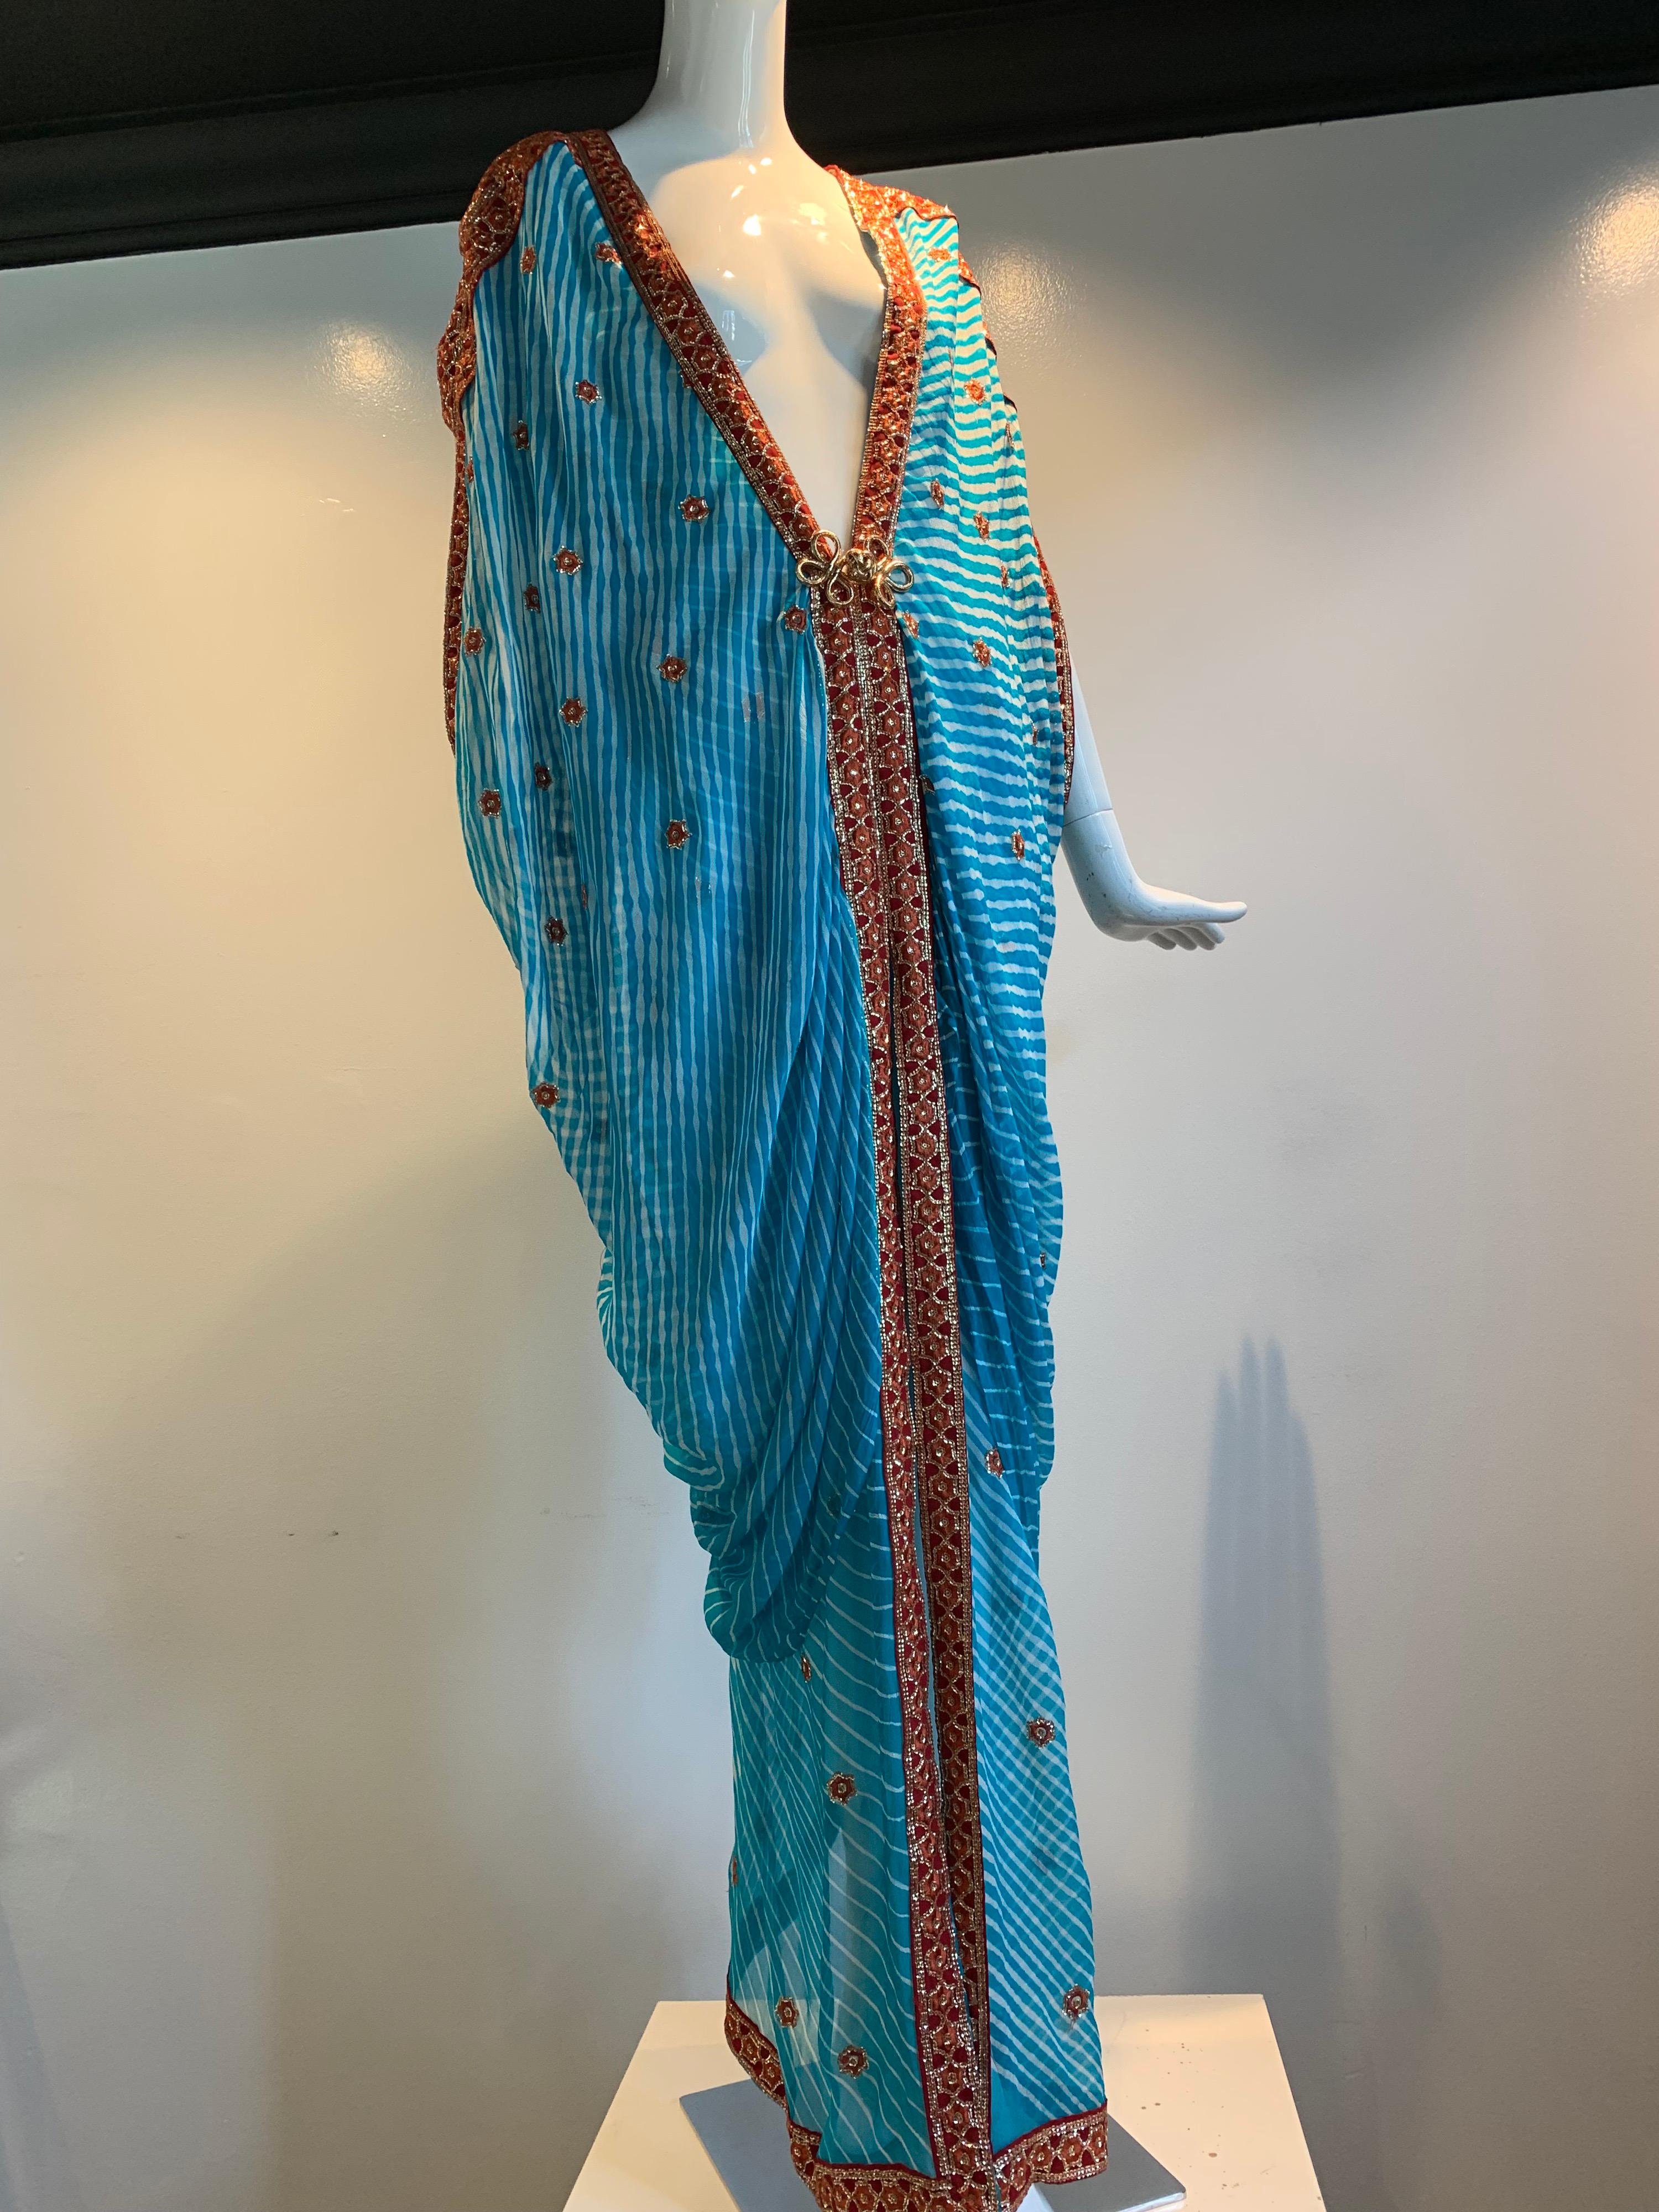 A stunning Torso Creations caftan made from exquisite vintage silk sari cloth of tie-dyed turquoise with rust and metallic thread embroidered stars and edging. Dolman effect draped sleeves and a back center adjustable drawstring for ease of